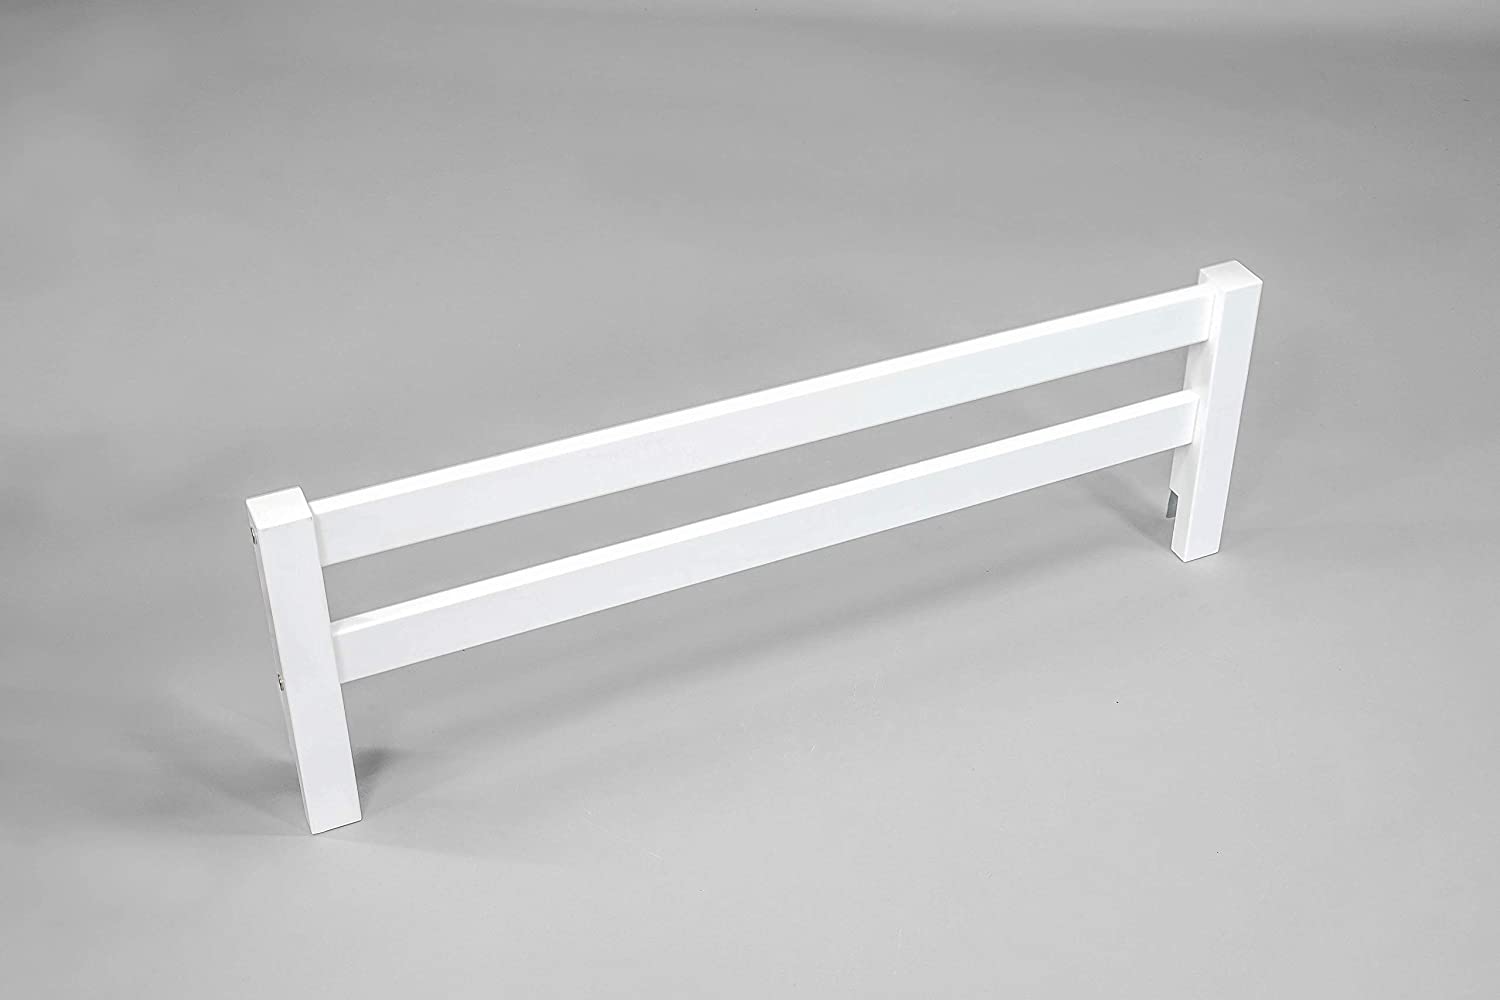 Safetots Premium Wooden Bed Rail Safety Toddler Bed Guard Kids Wood Bedrail 